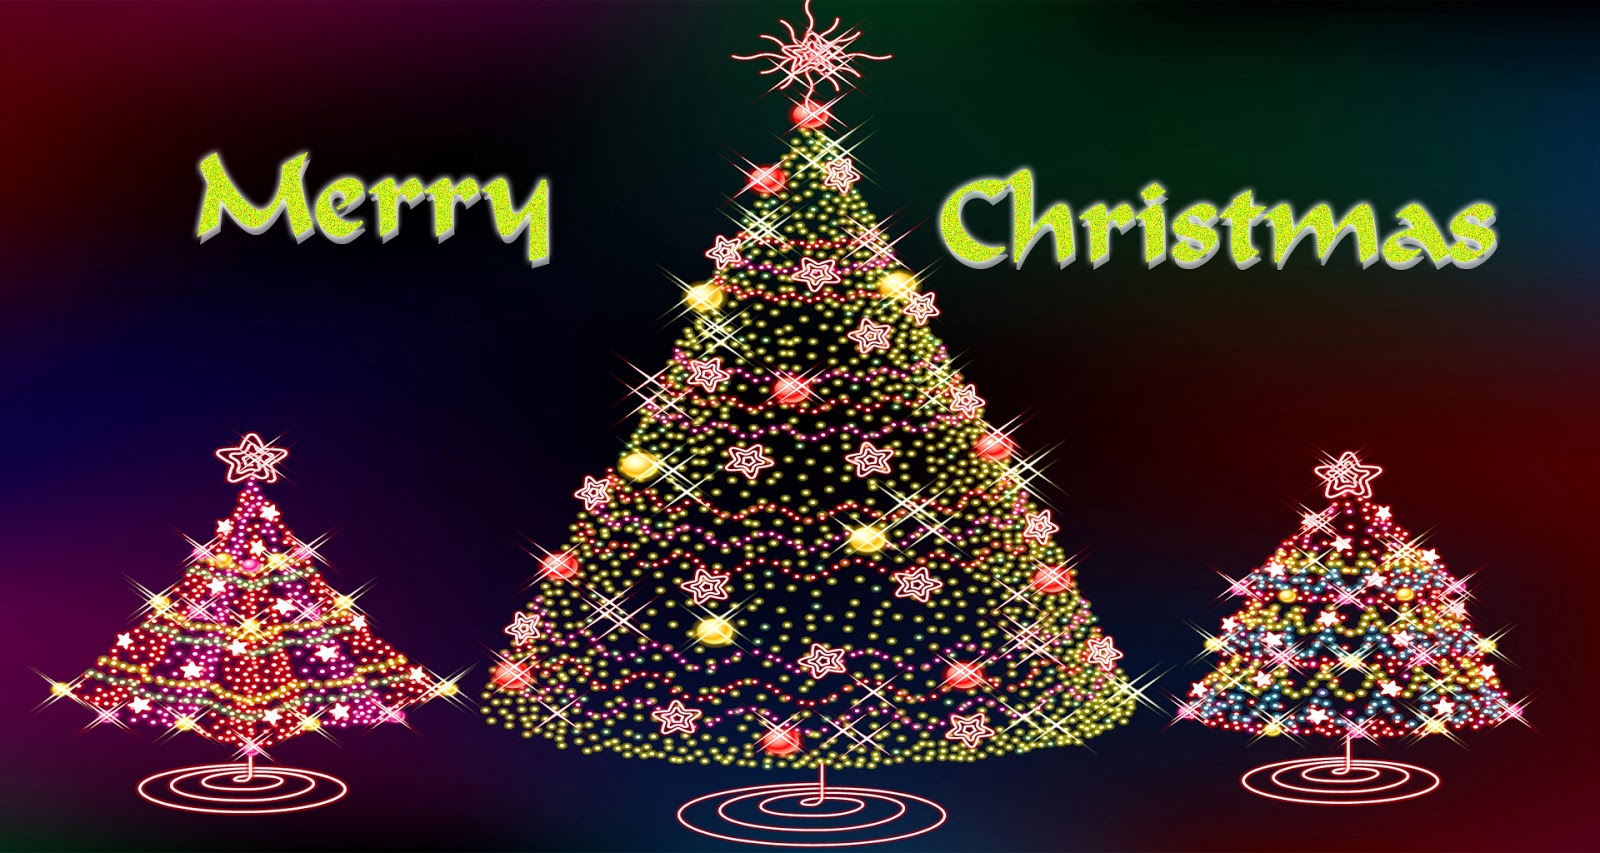 Merry Christmas 2020 Hd Wallpapers